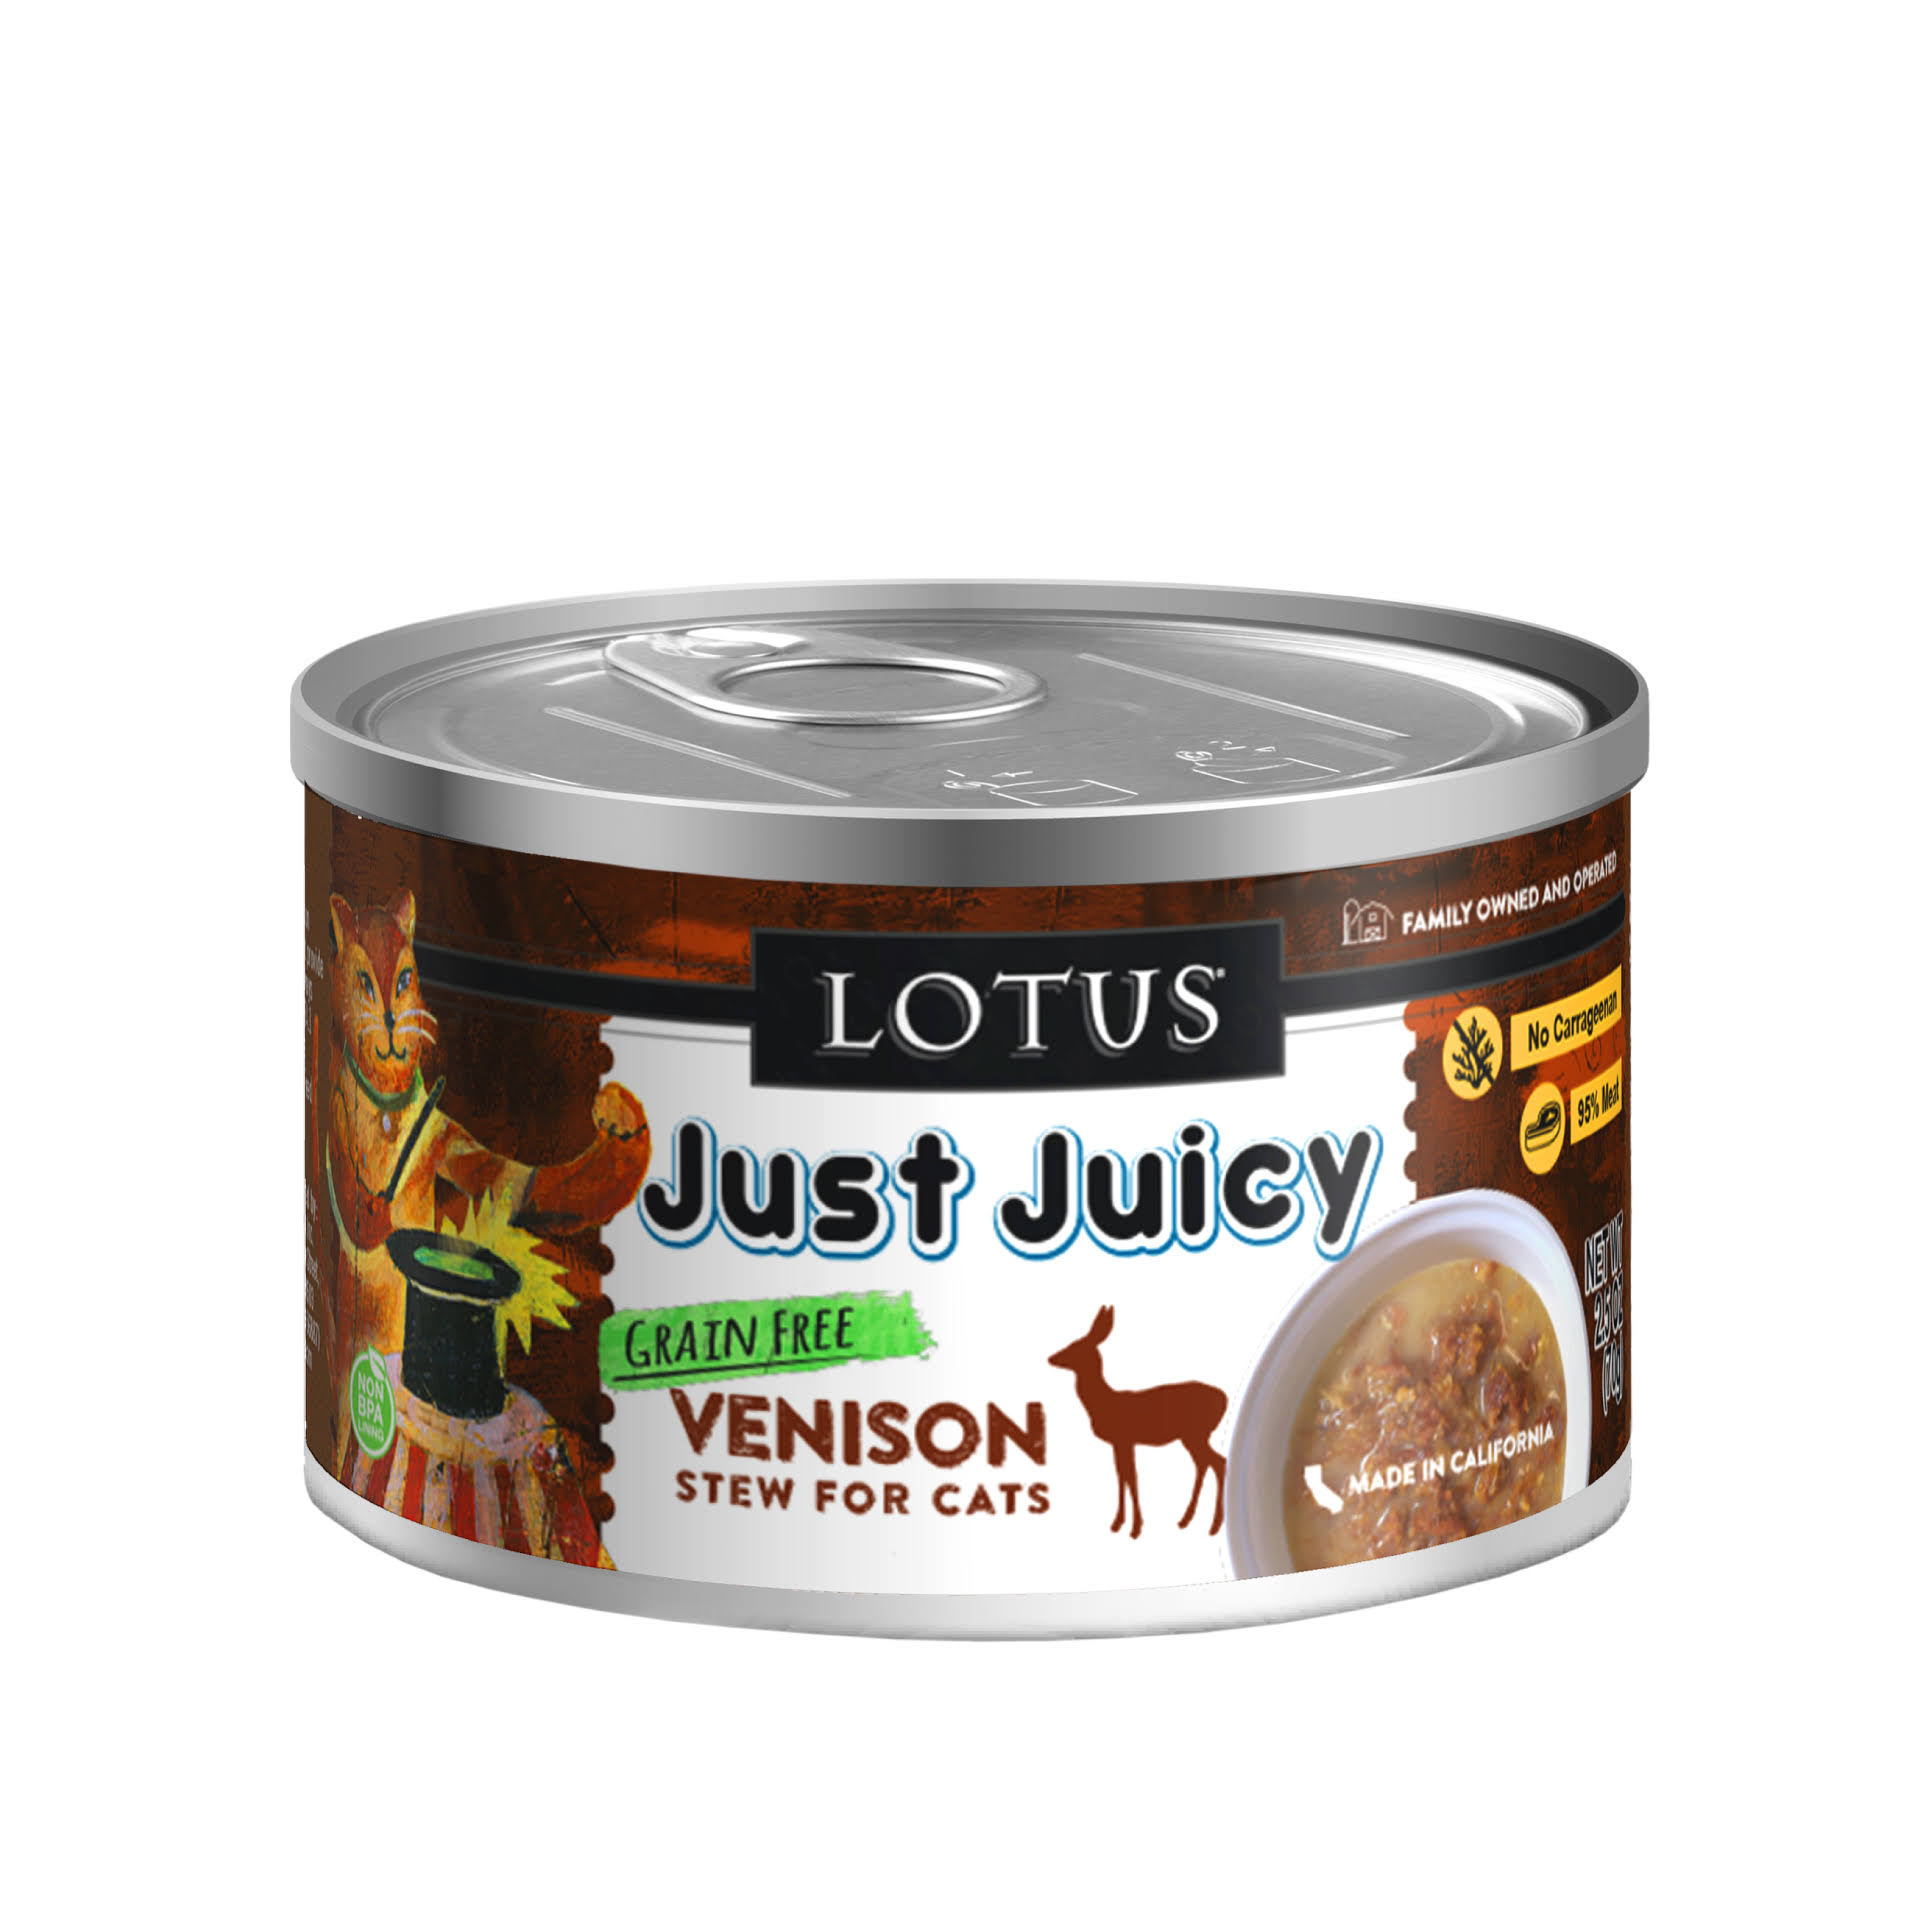 Lotus Just Juicy Venison Stew Canned Cat Food / 5.3 oz